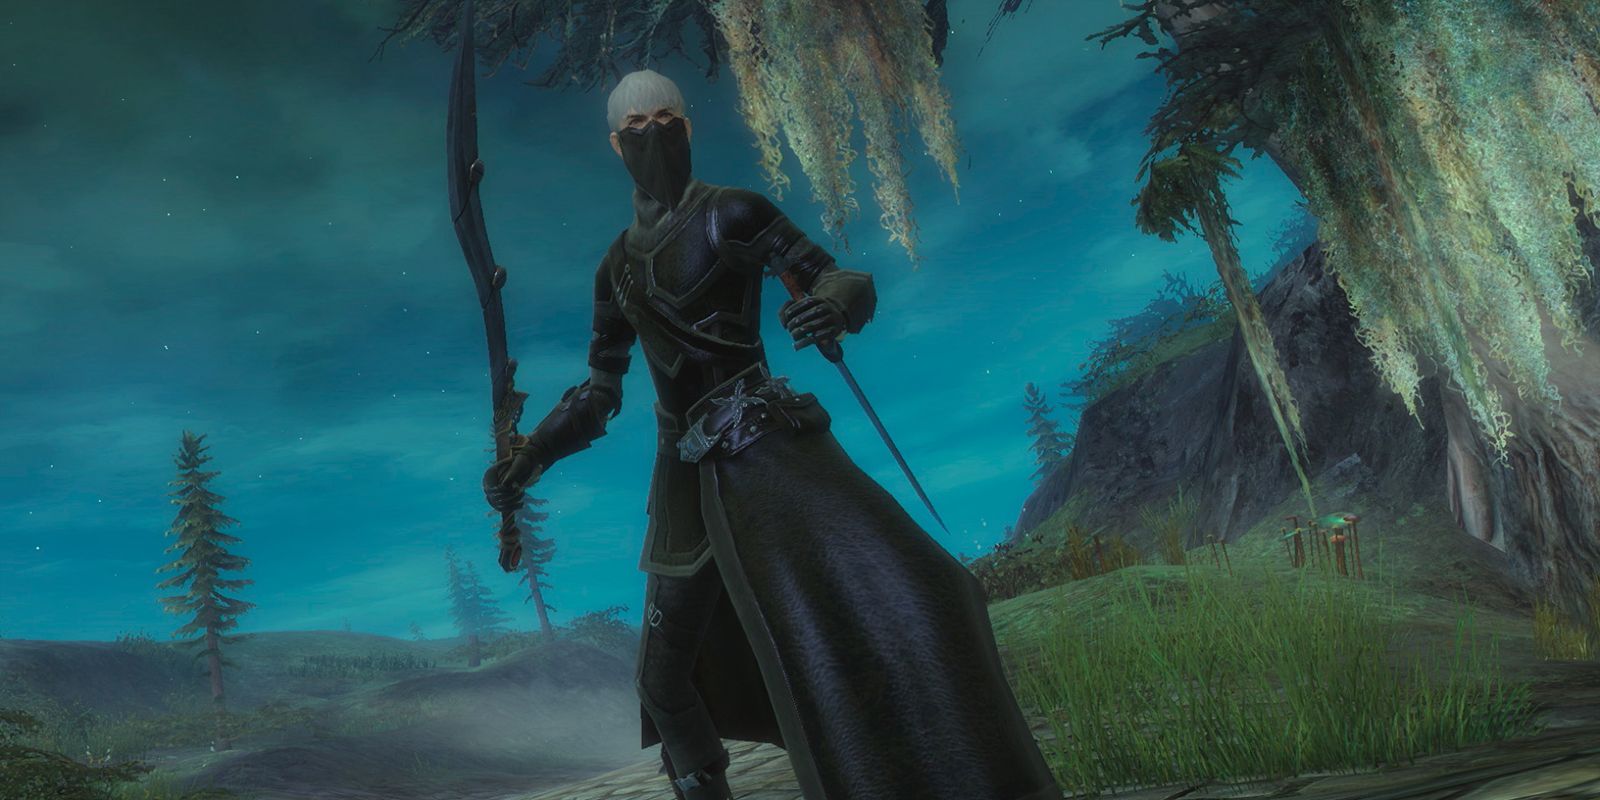 age of wonders 3 rogue assassins can go by themself?